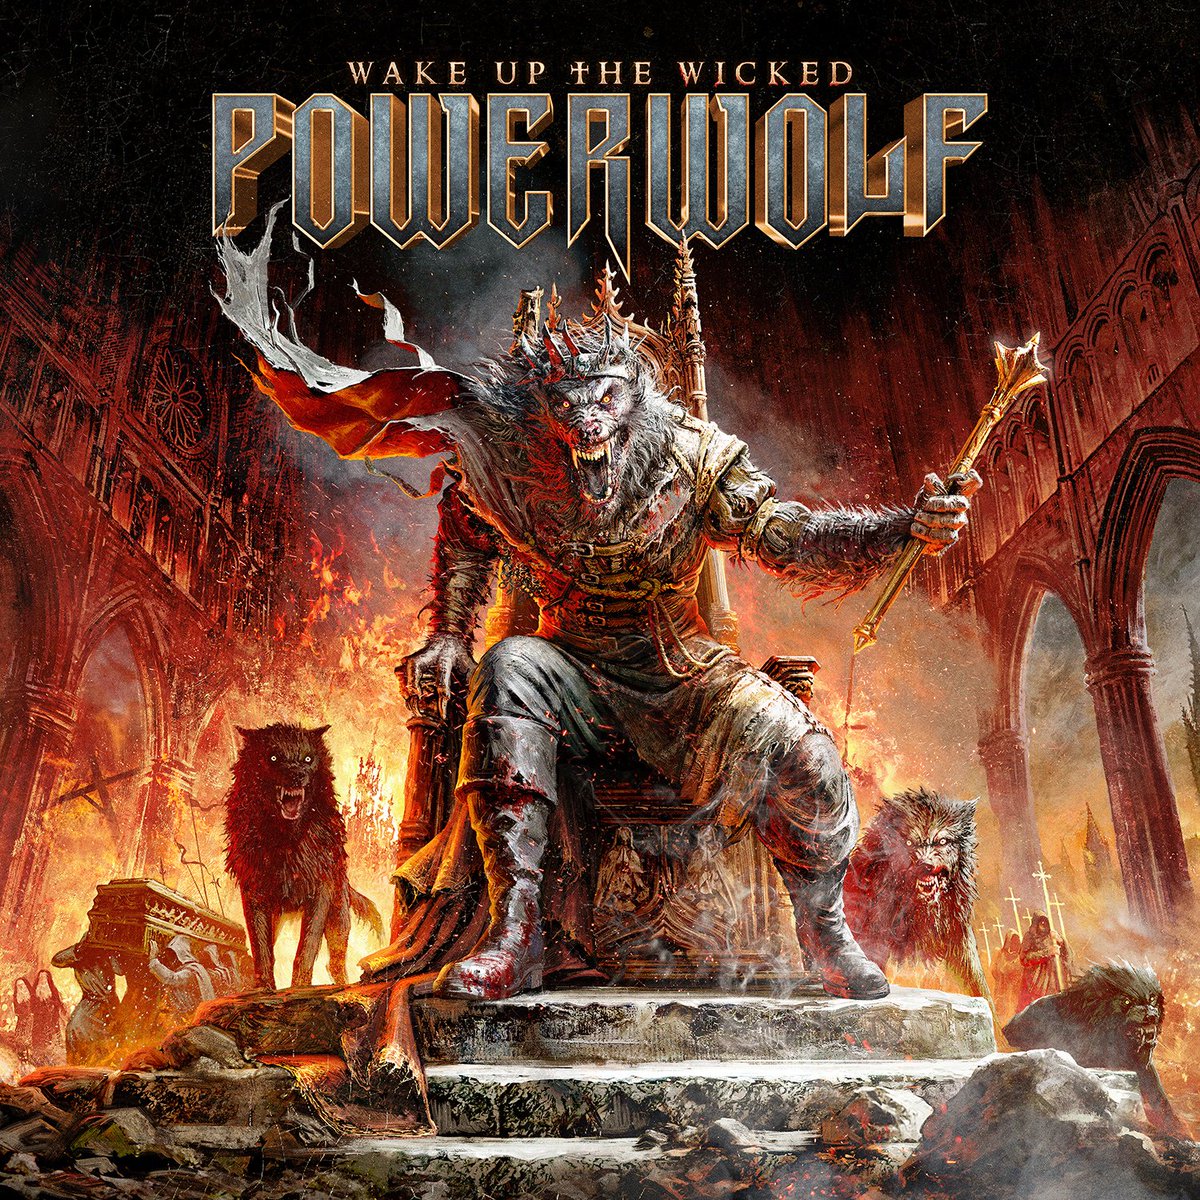 It's time to set the world on fire! The new POWERWOLF album 'Wake Up The Wicked' will be released on July 26, 2024! The once again mesmerizing artwork by Zsofia Dankova perfectly reflects... bit.ly/3VJlkxa ! #powerwolf #wakeupthewicked #heavymetal